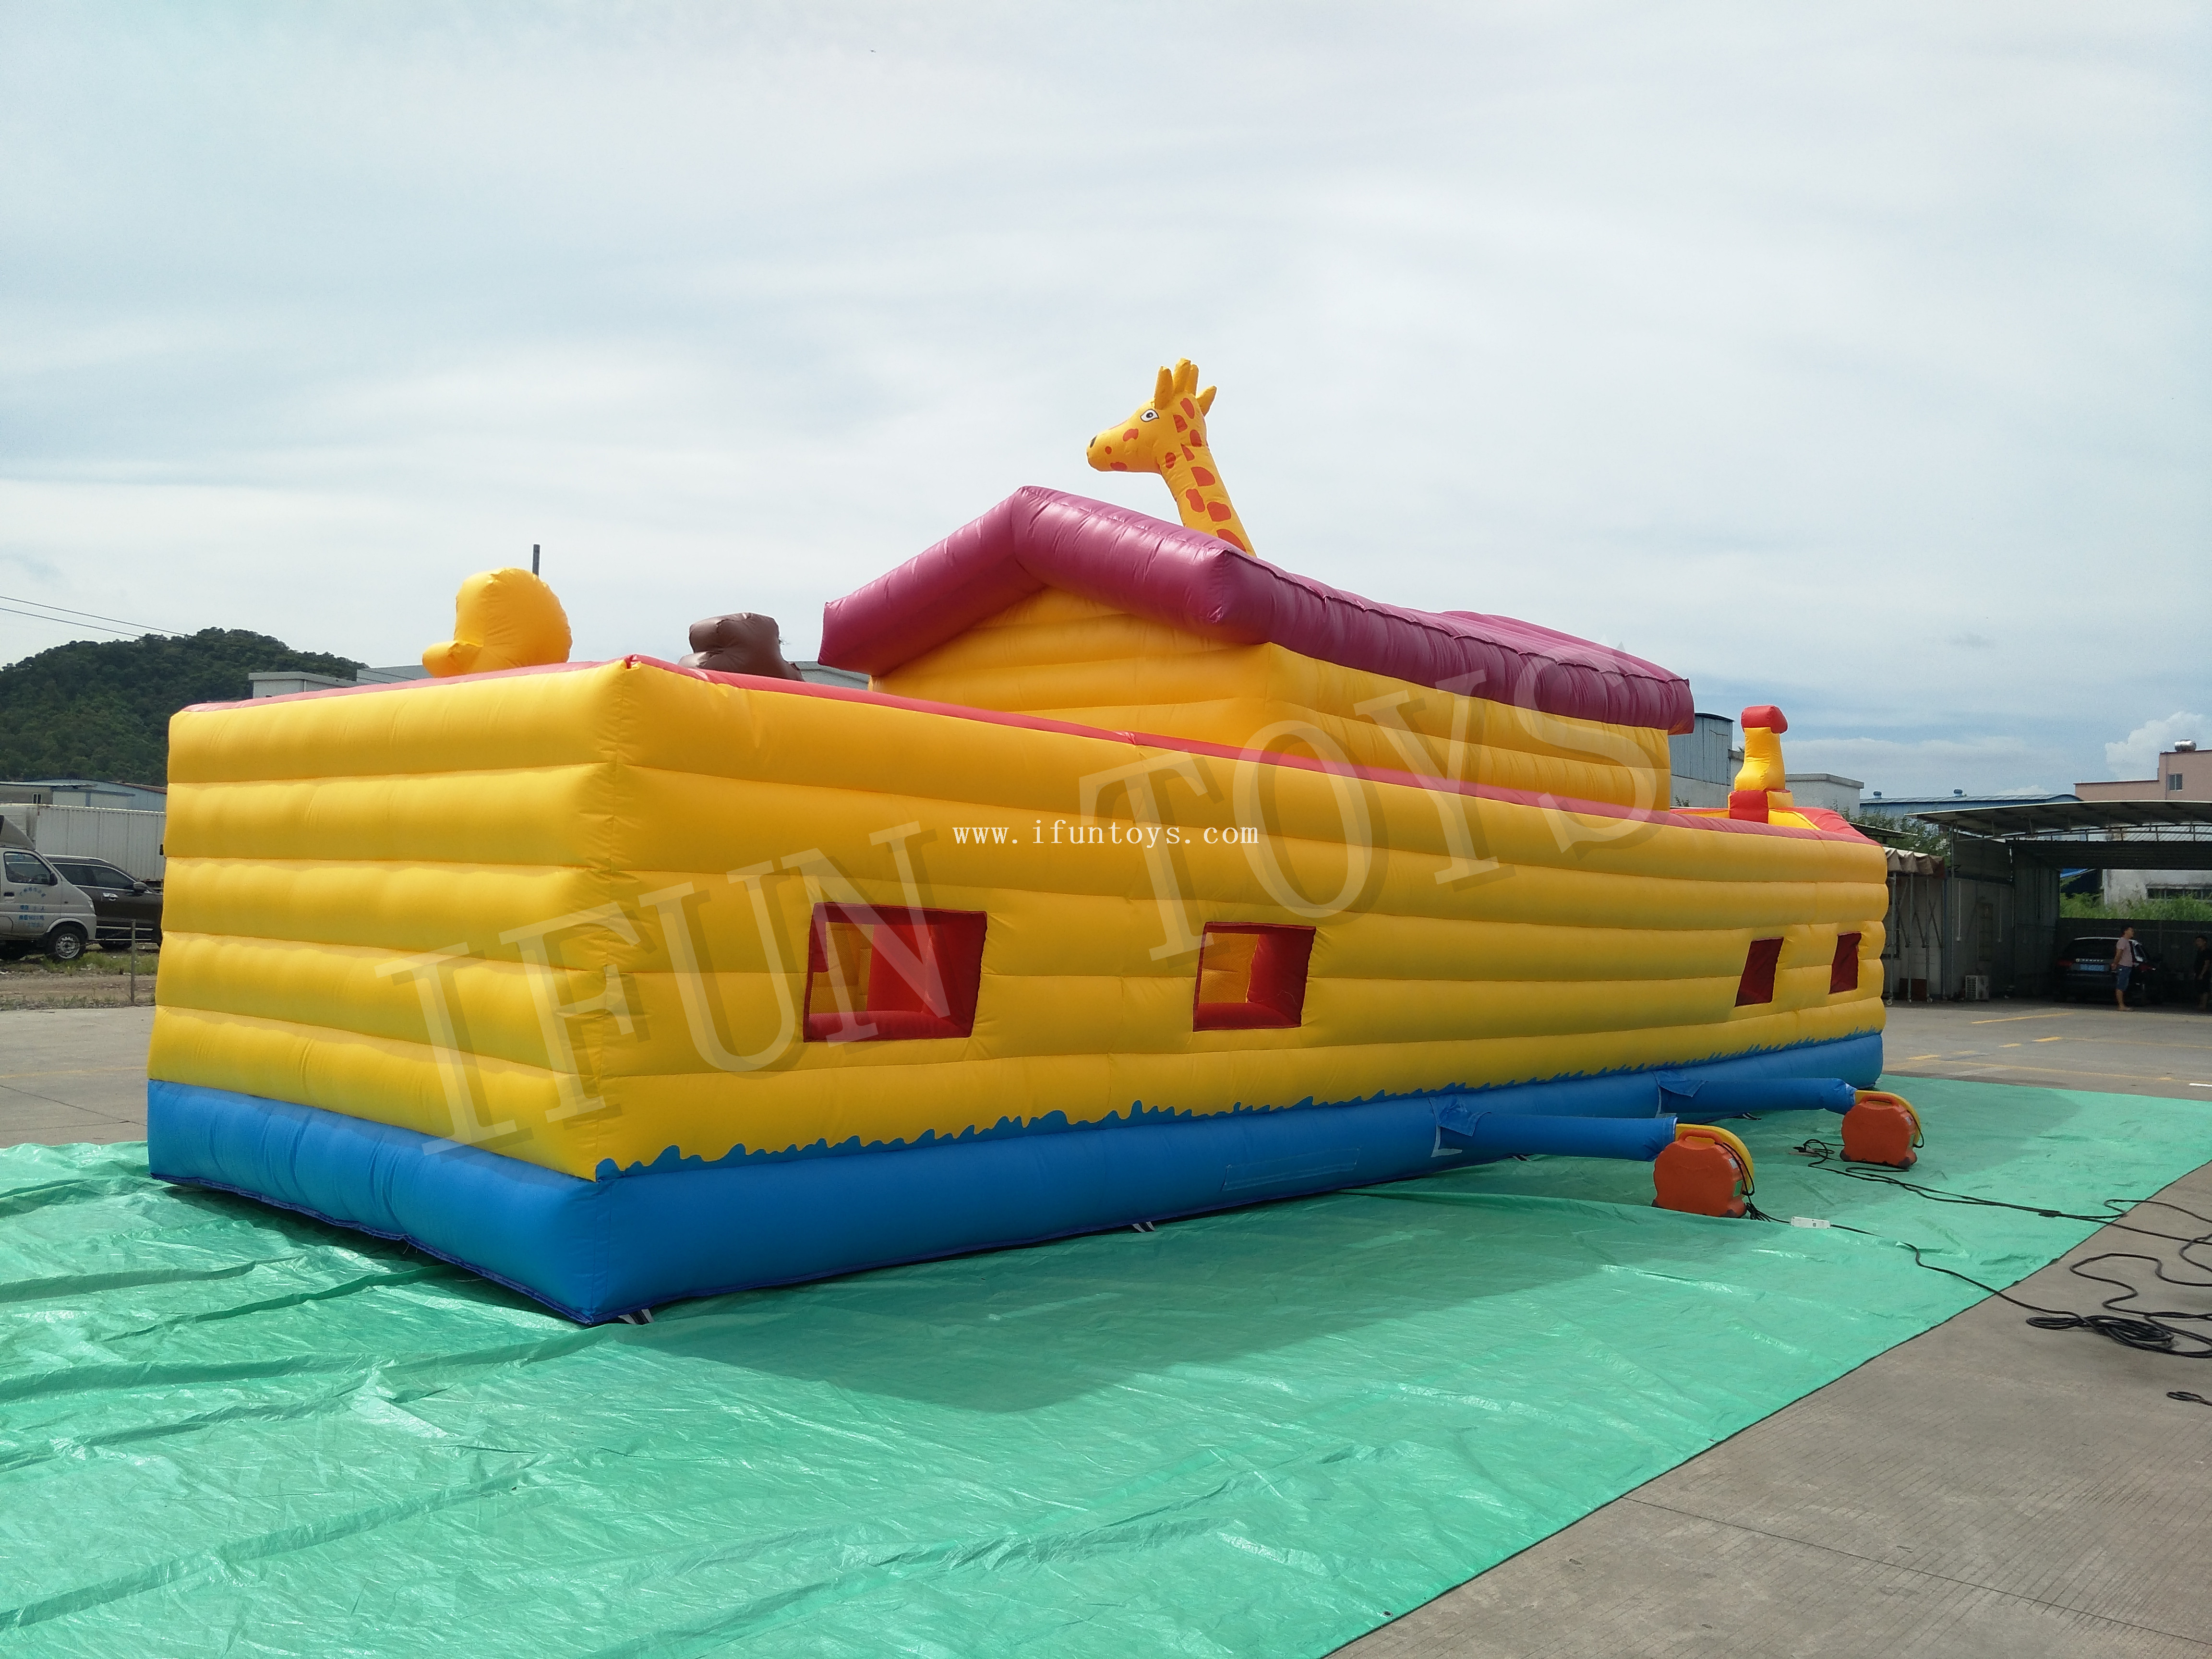 Noah's Ark Inflatable Bounce House / Jumping Castle for Kids Playground